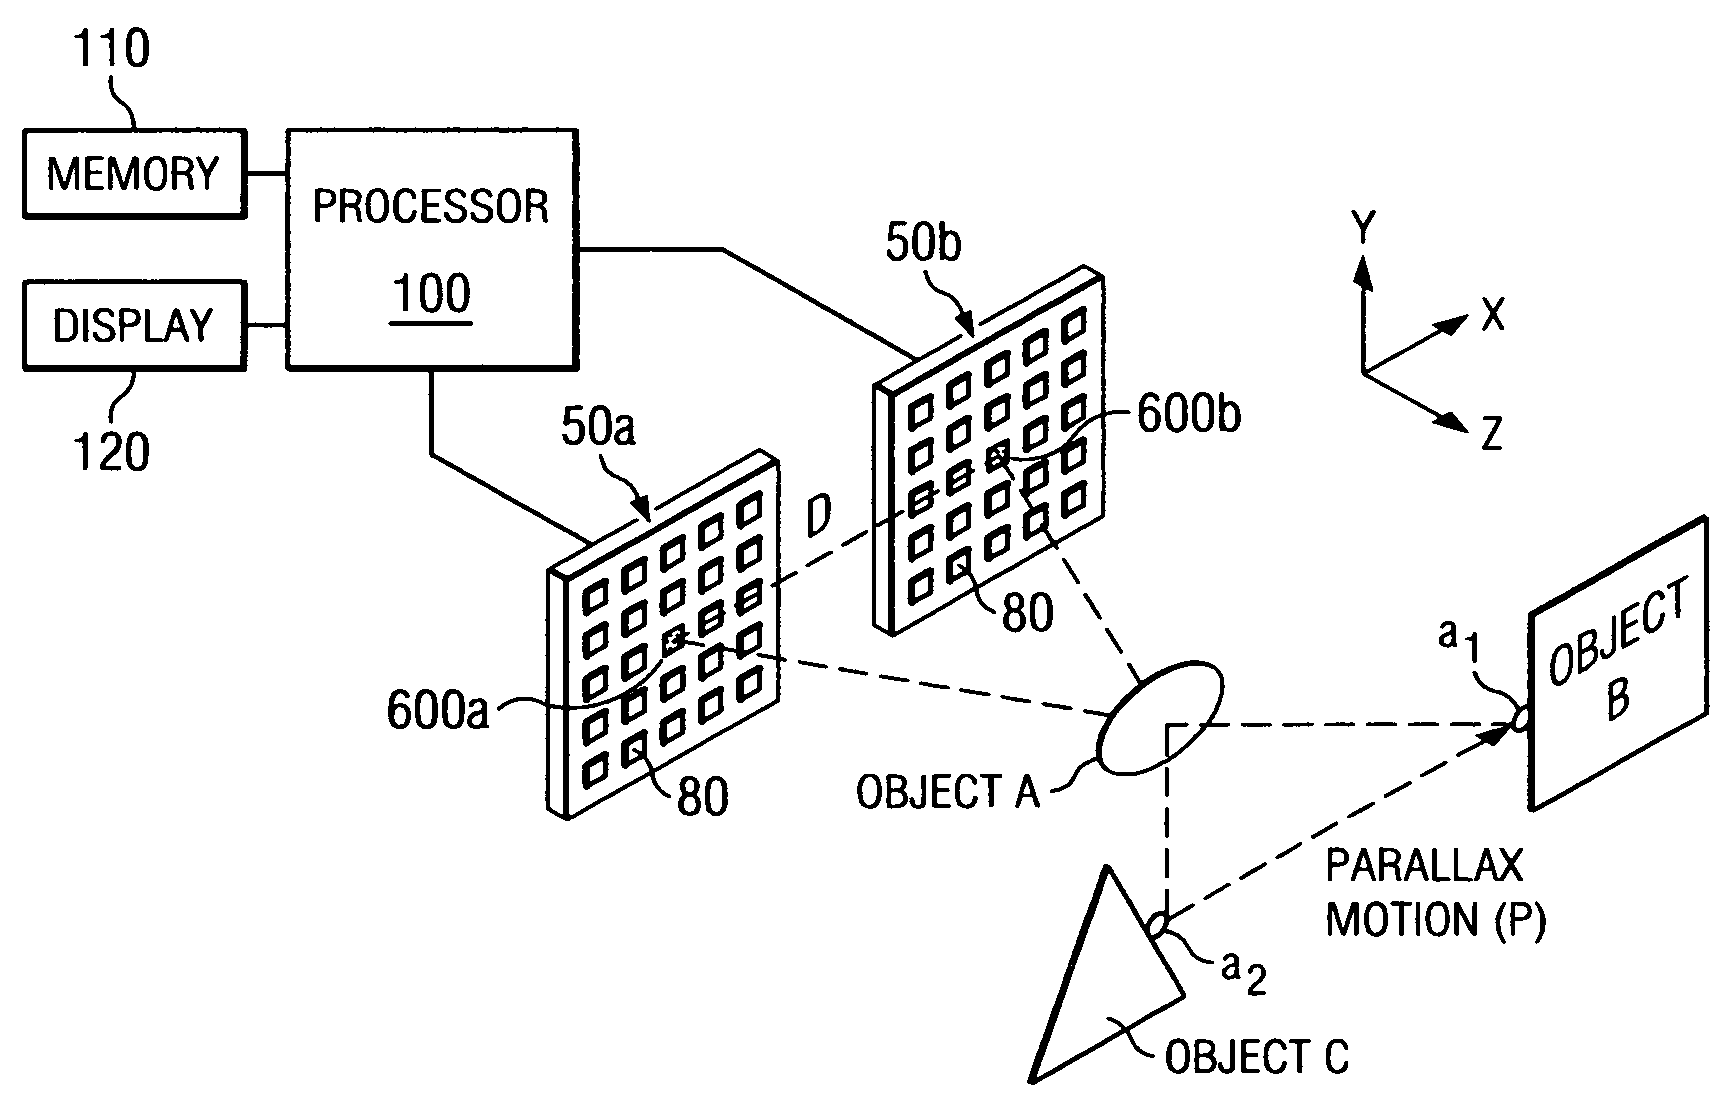 System and method for stereoscopic anomaly detection using microwave imaging